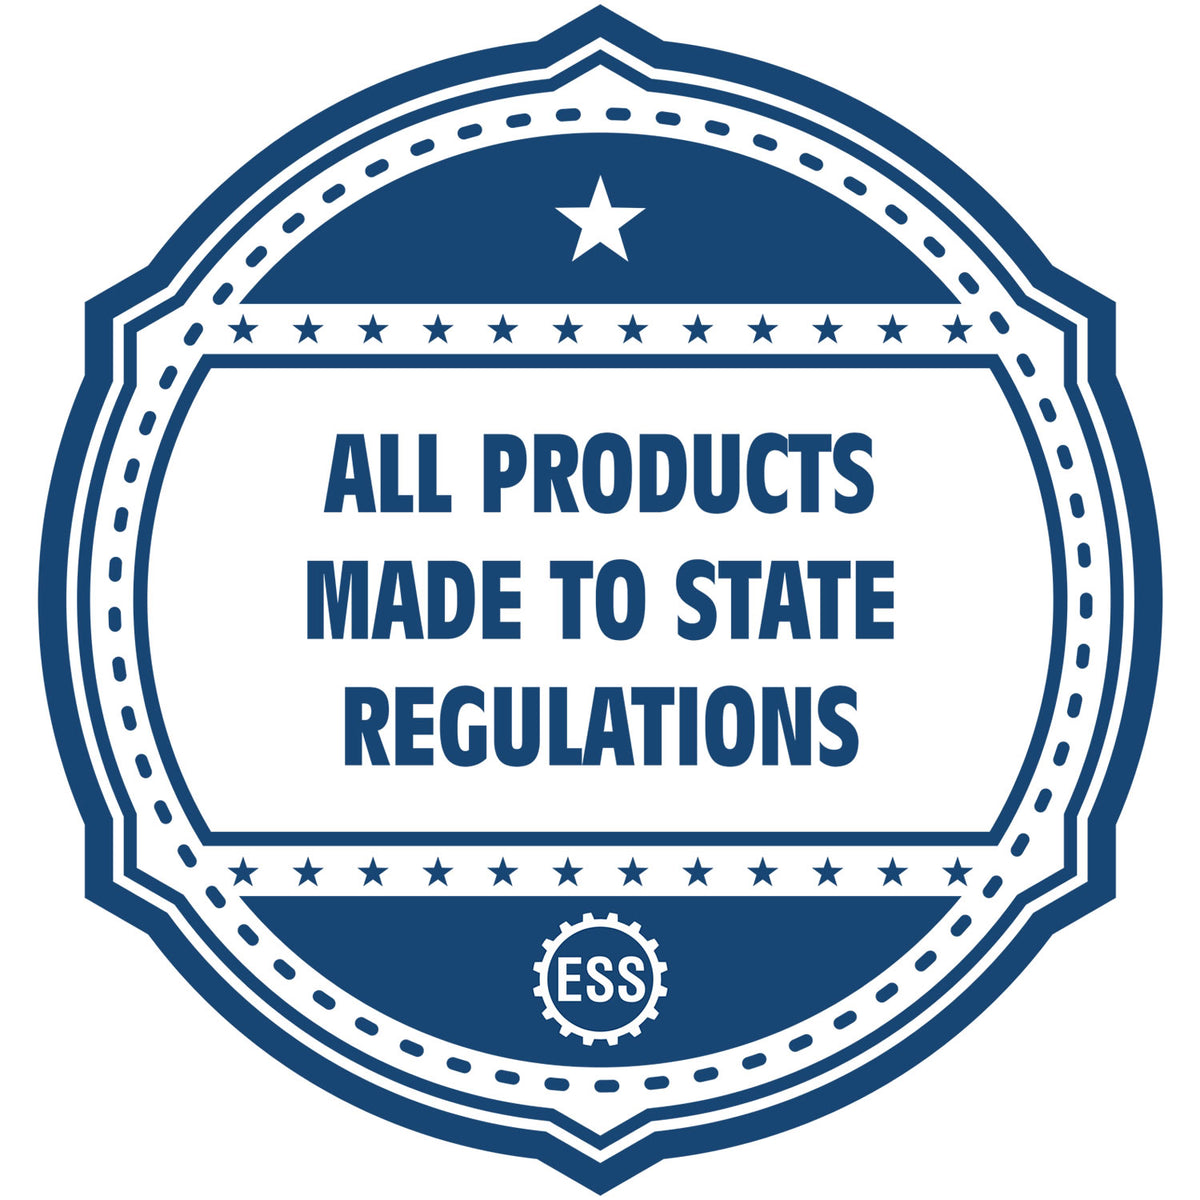 An icon or badge element for the Maryland Engineer Desk Seal showing that this product is made in compliance with state regulations.